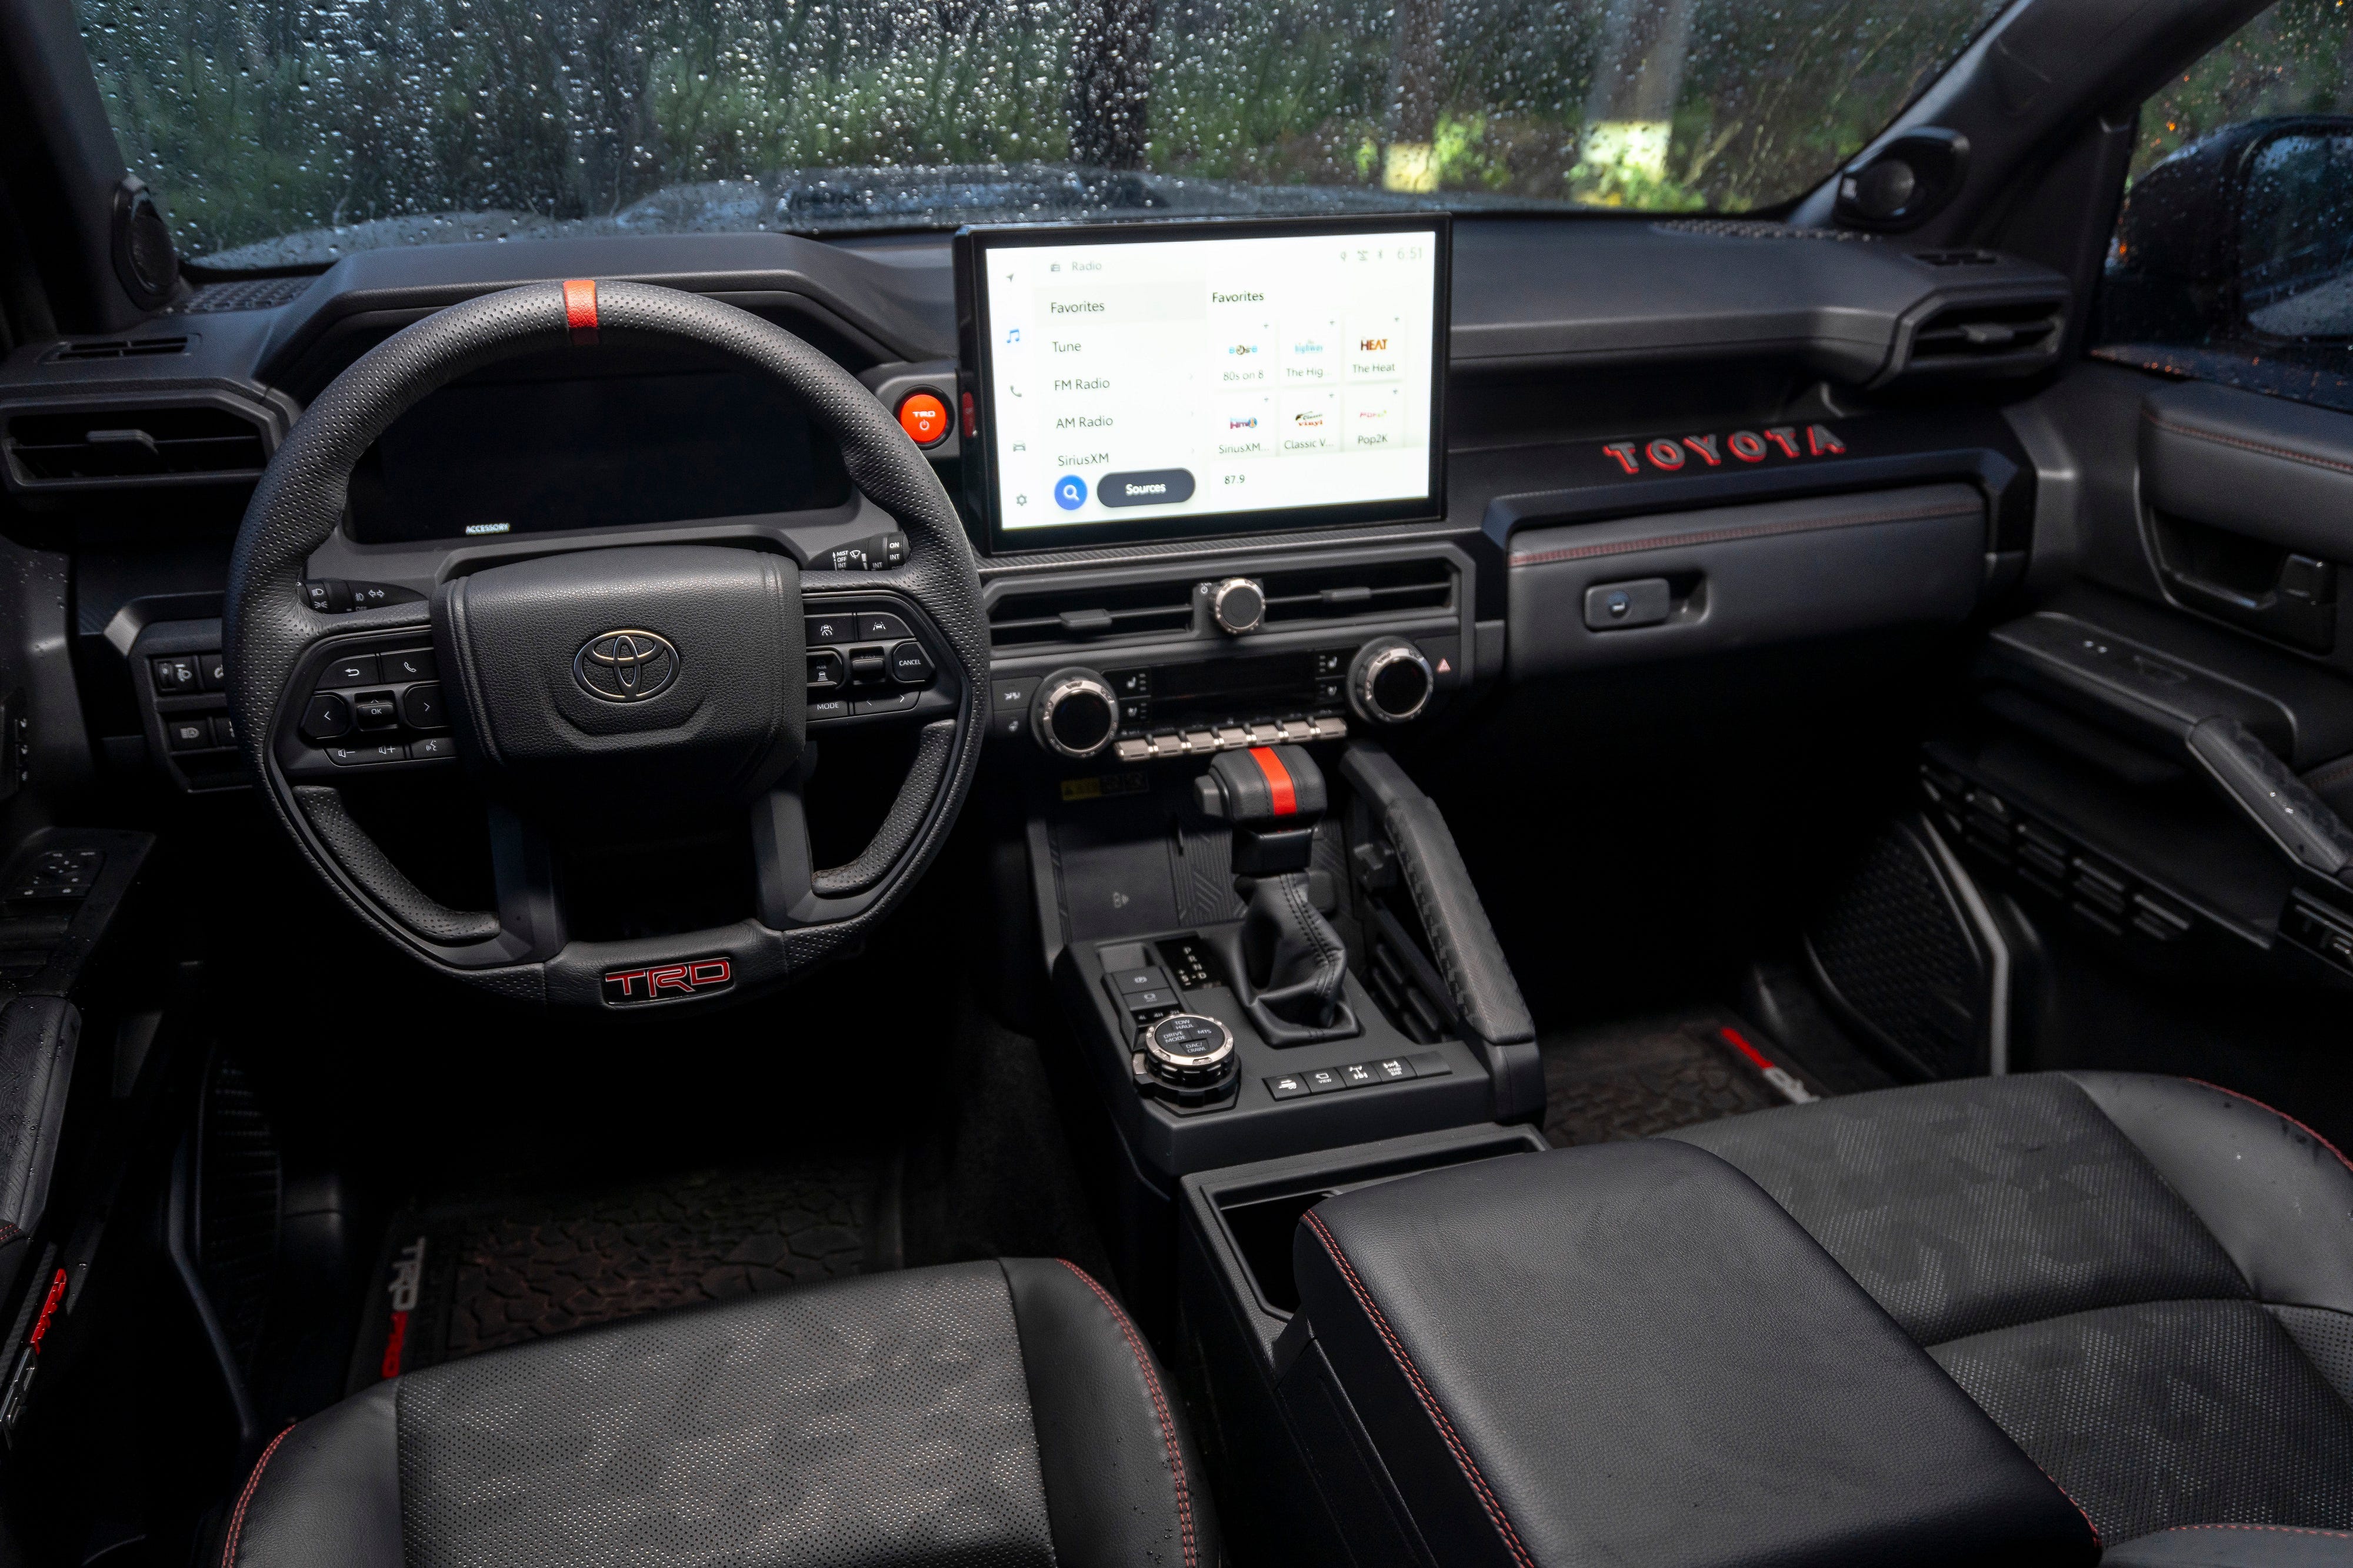 <p>Drivers of the new 4Runner can expect a state-of-the-art interior multimedia system, as well as a smart key push-start button and a digital key on select models, which can be shared remotely. </p>